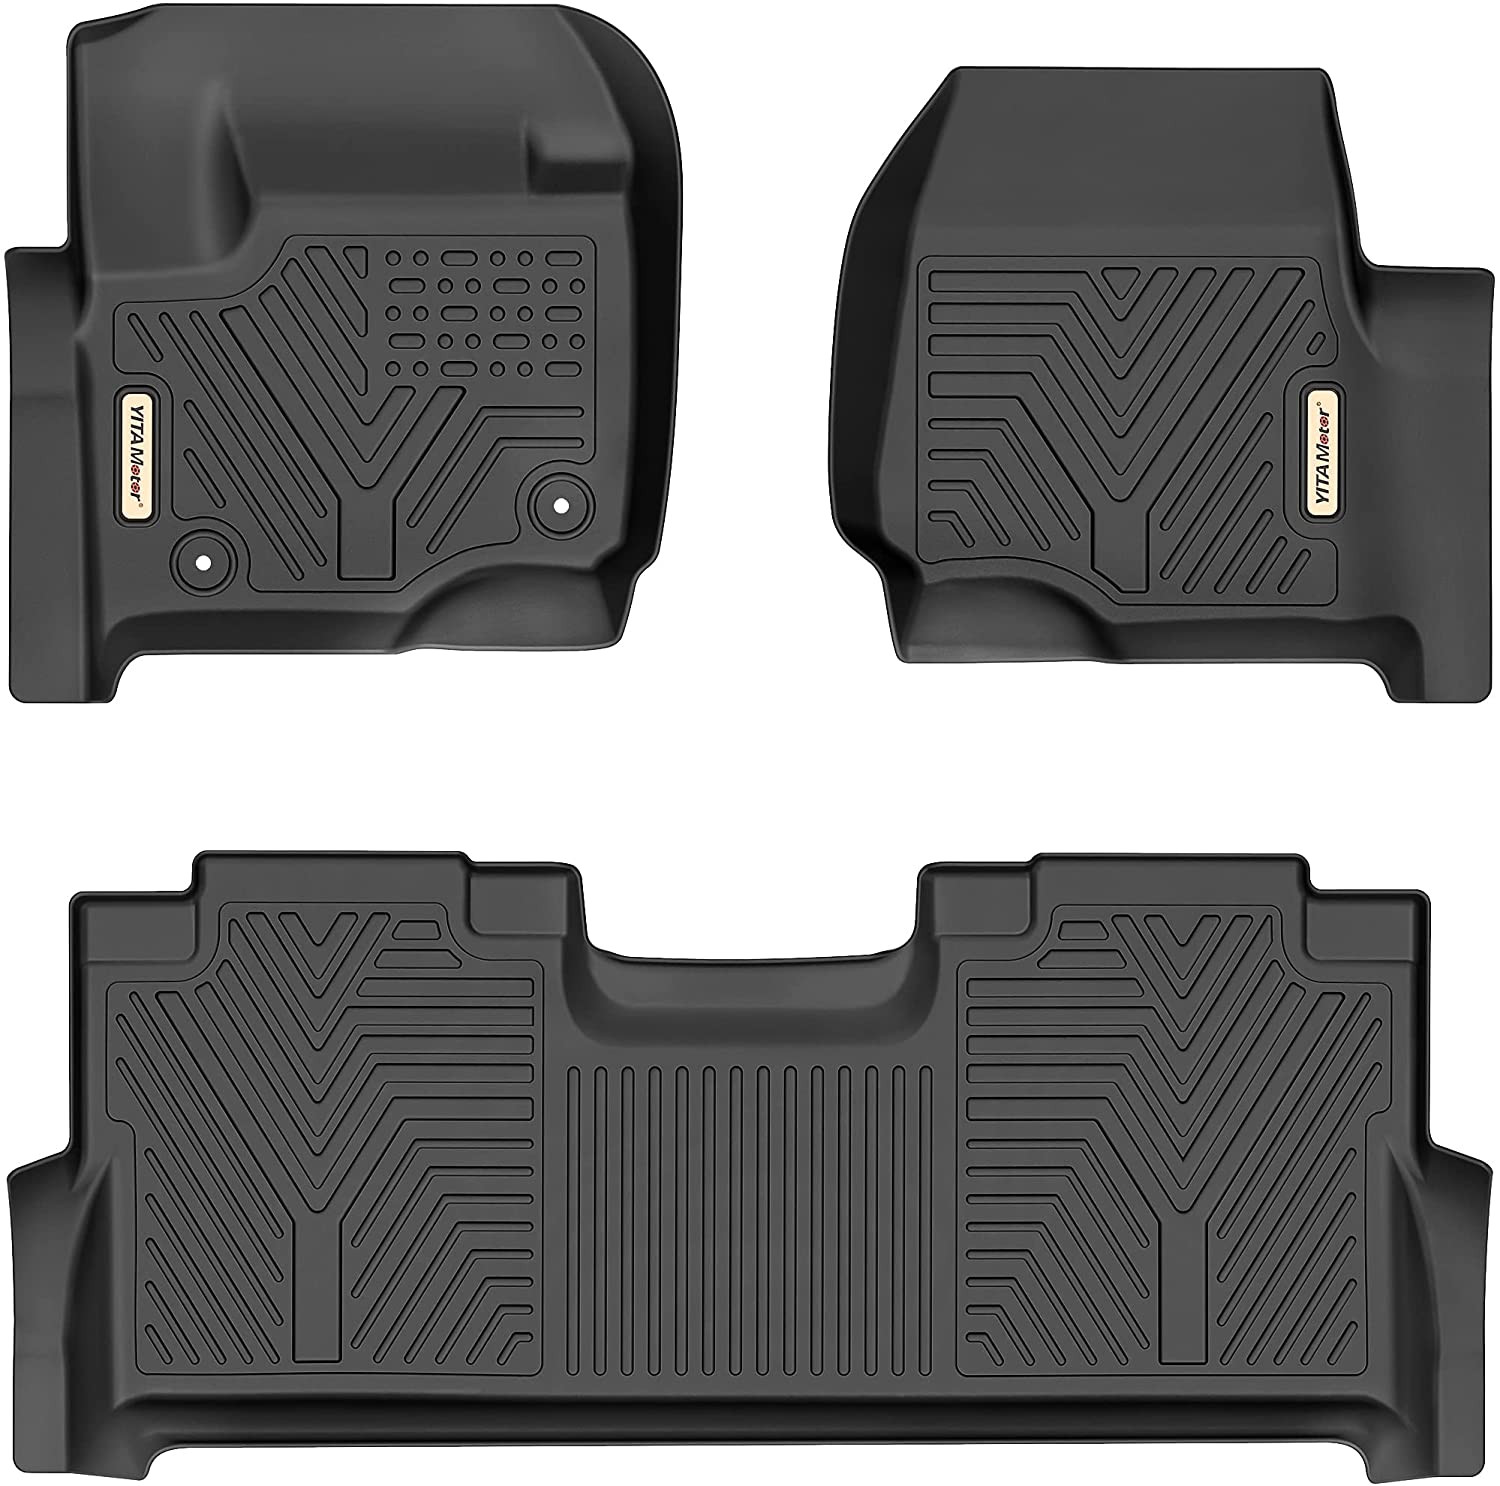 YITAMOTOR Floor Mats Compatible for 2013-2017 Honda Accord Sedans Front and Rear 2 Rows All Weather Heavy Duty Rubber Car Floor Liners Black 